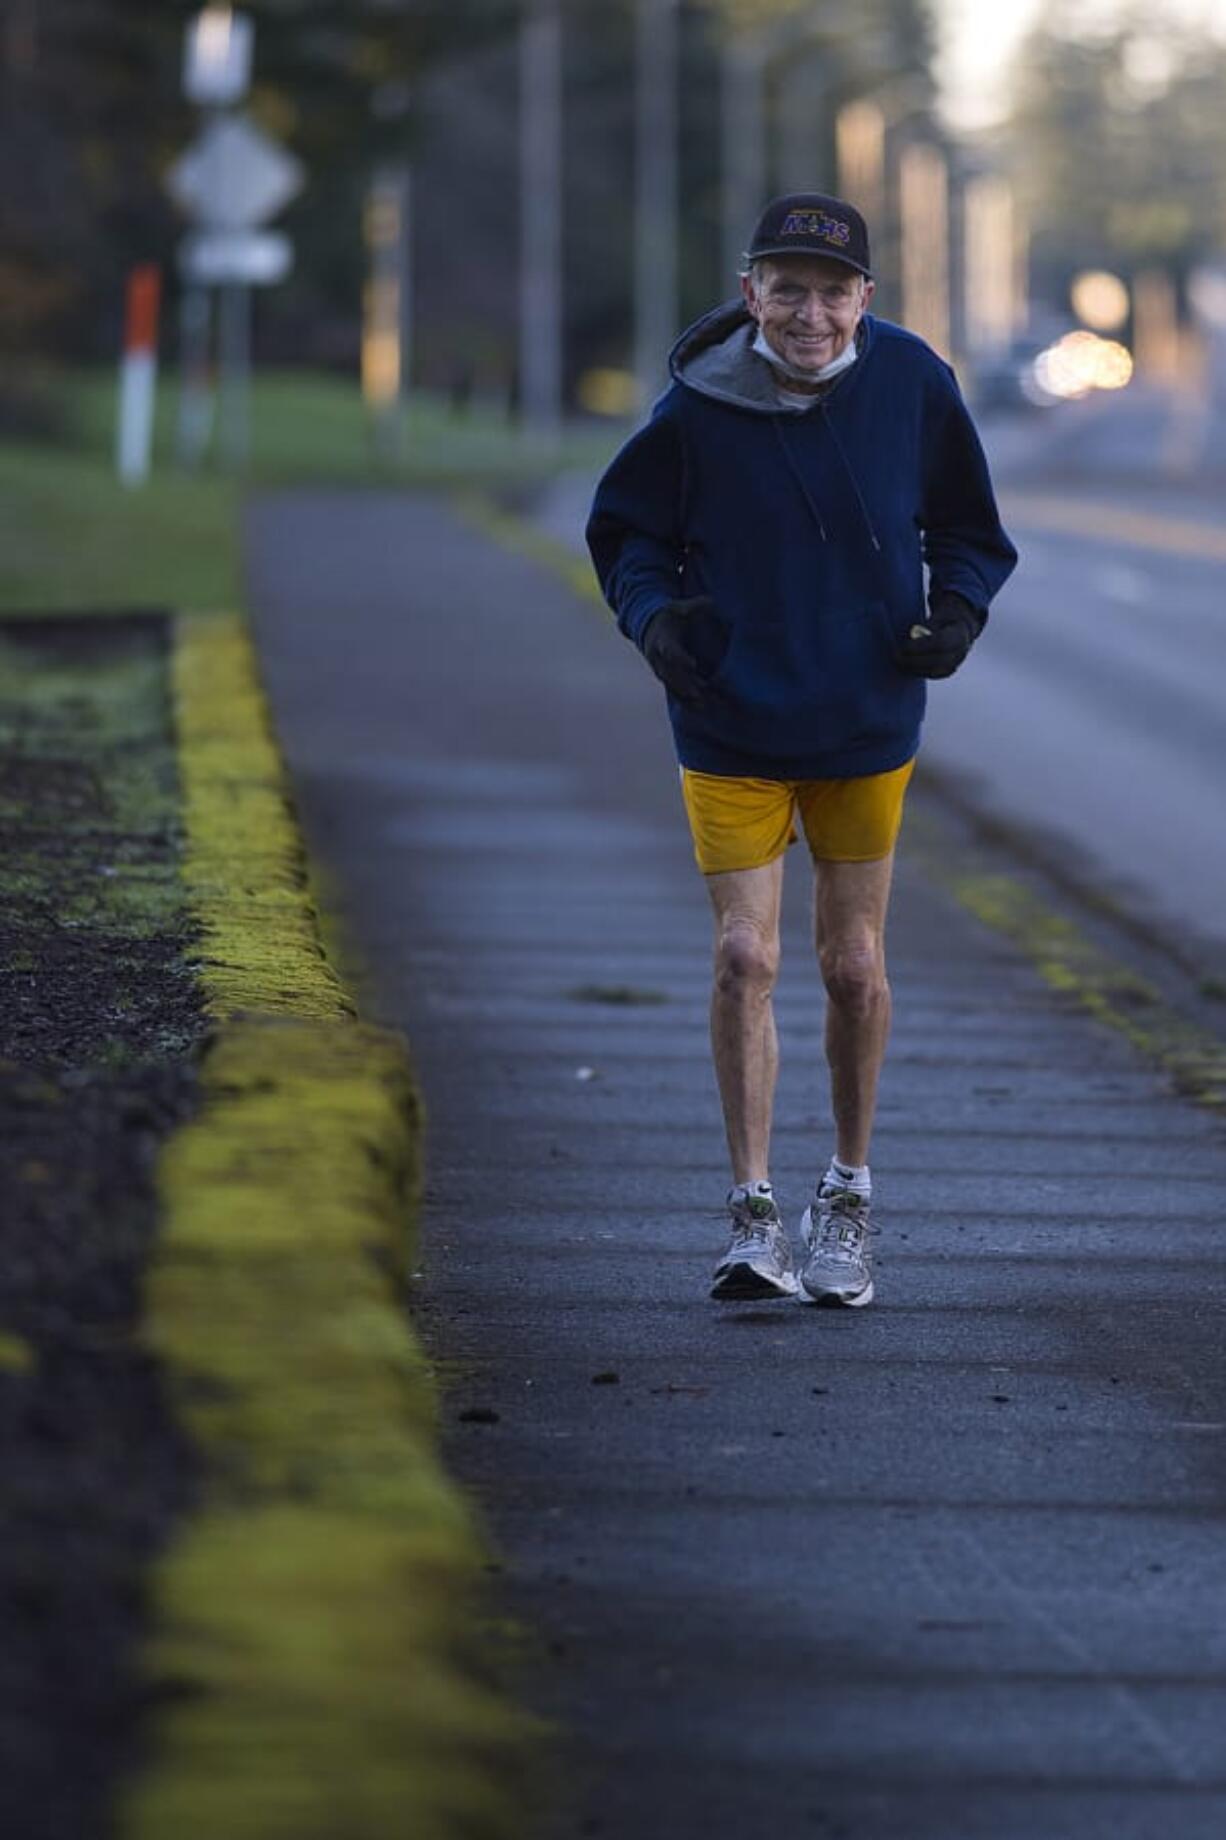 Jerry Kotsovos of Camas, pictured on his daily run Wednesday afternoon, December 23, 2020, has been running for 46 years. Now at the age of 74, he will reach a milestone of running his 130,000th mile on Christmas Day.